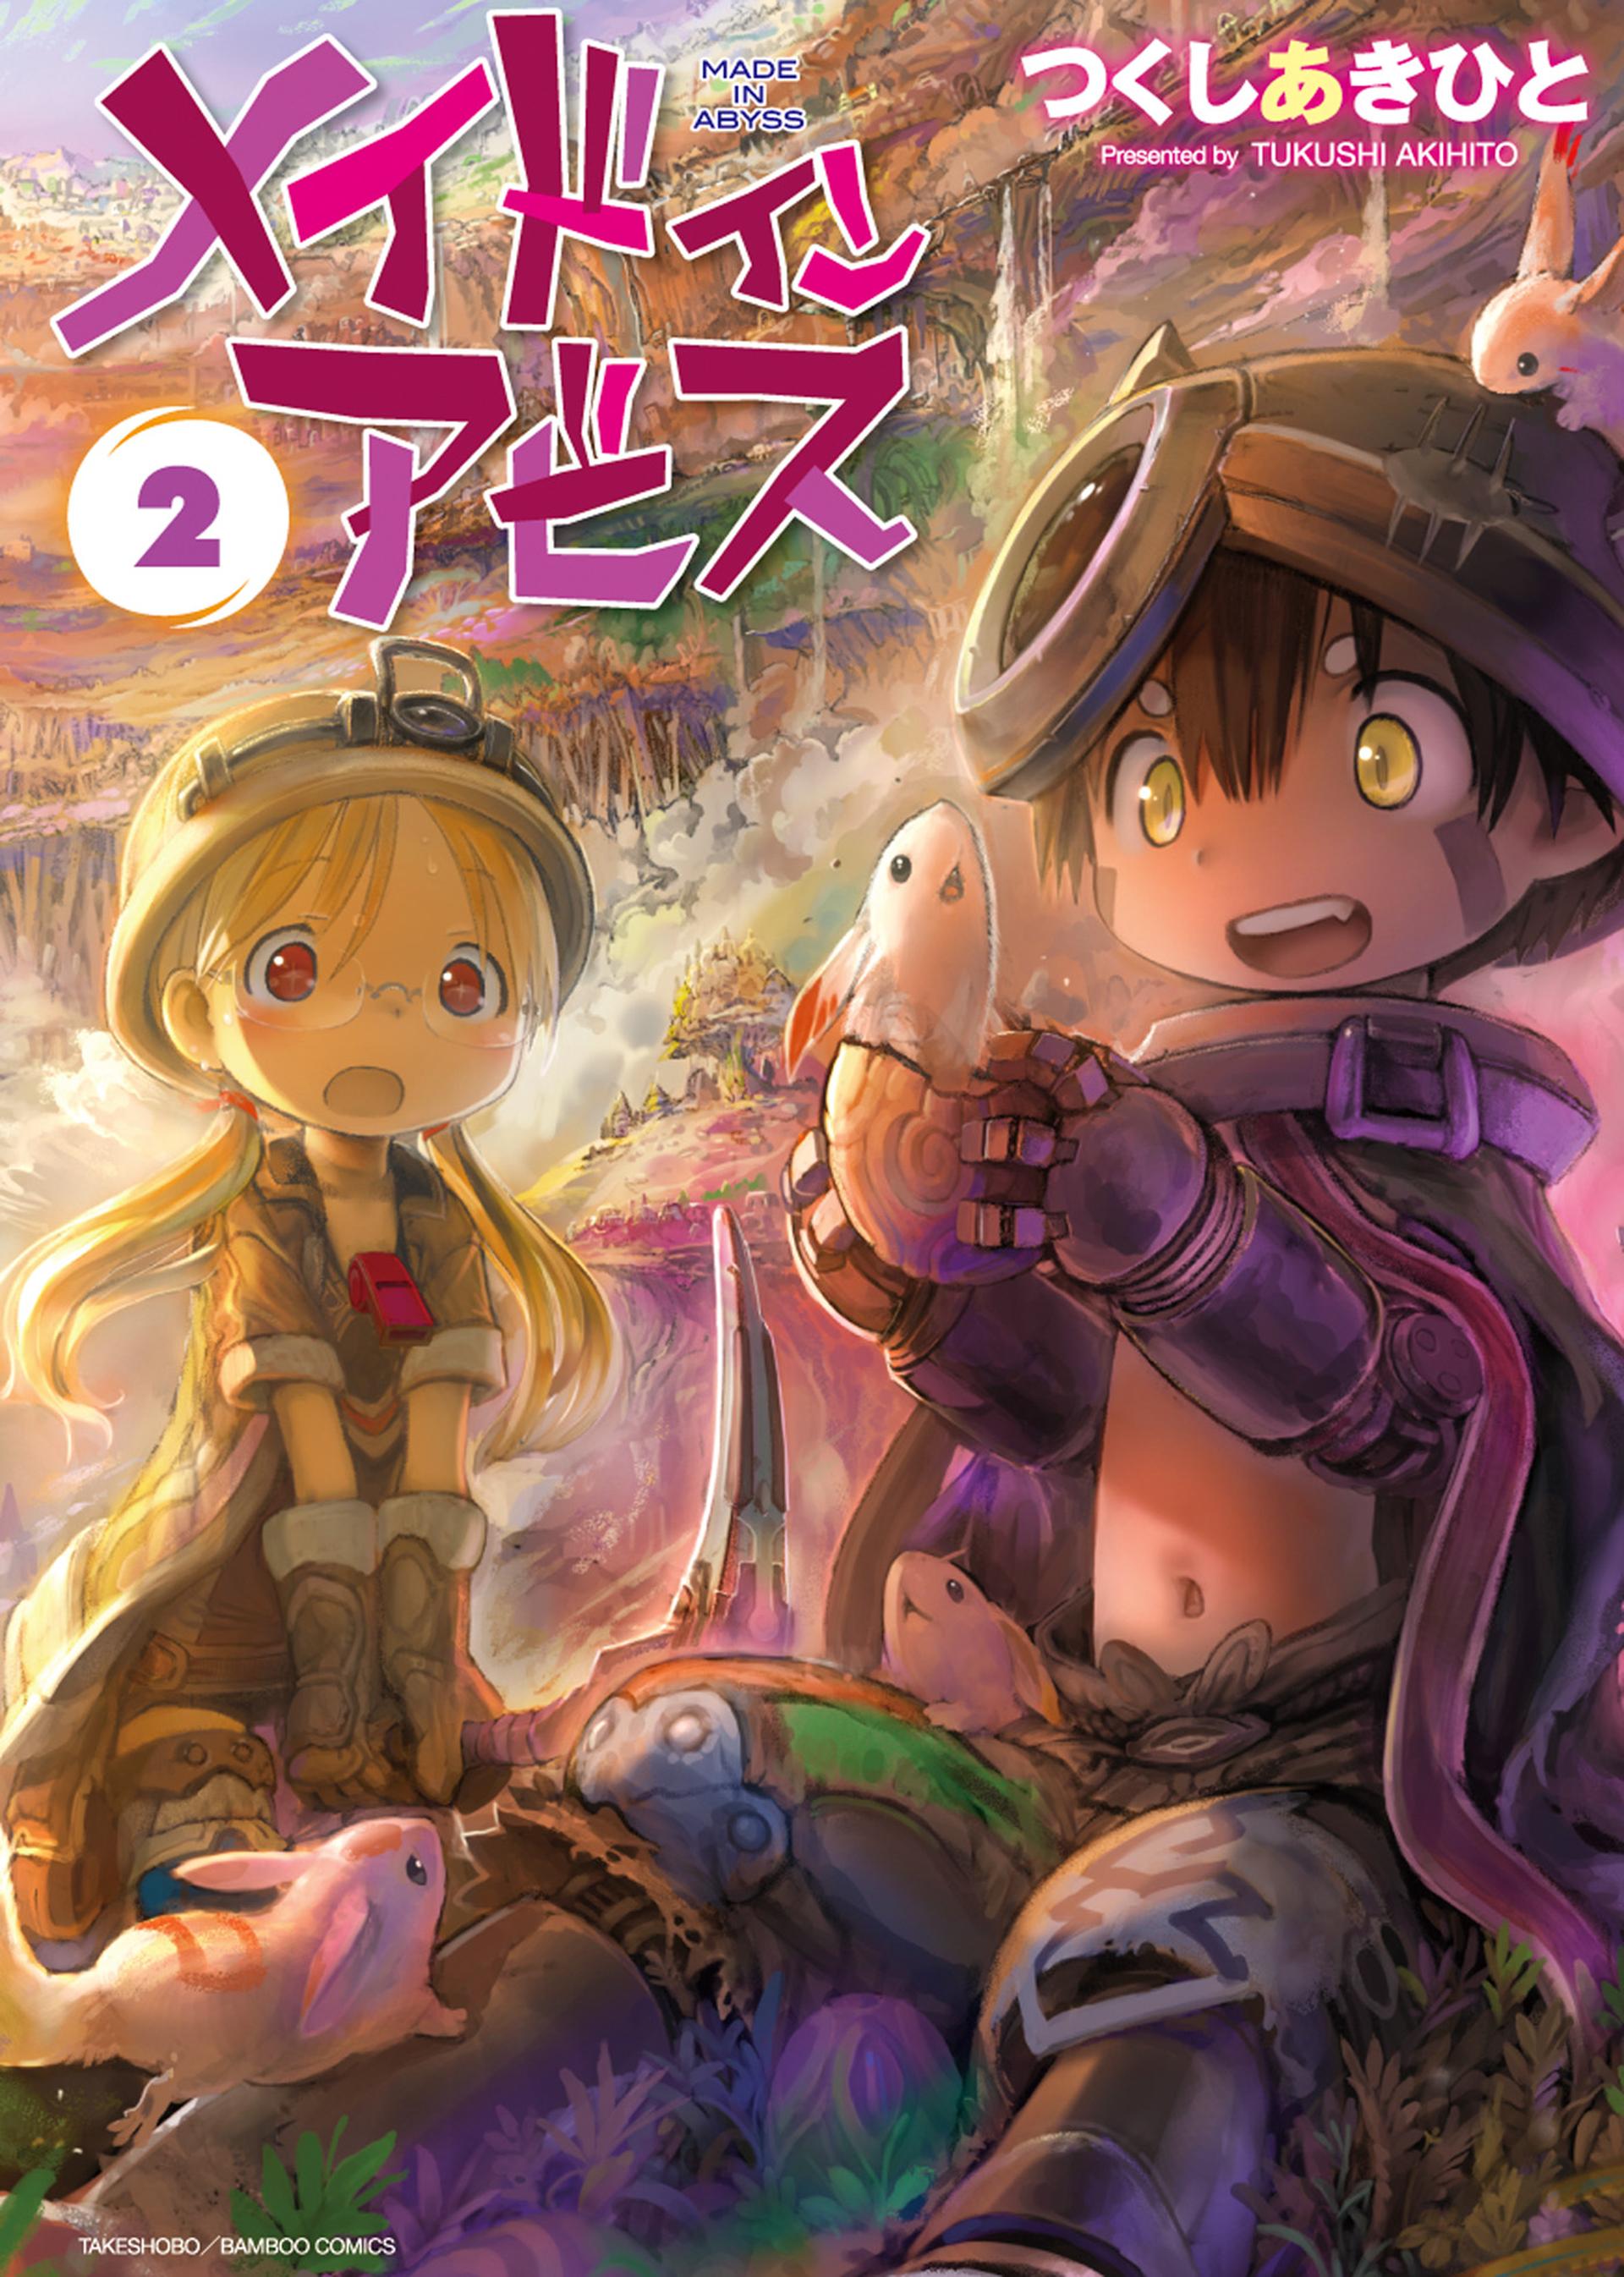 Made in Abyss cover 31